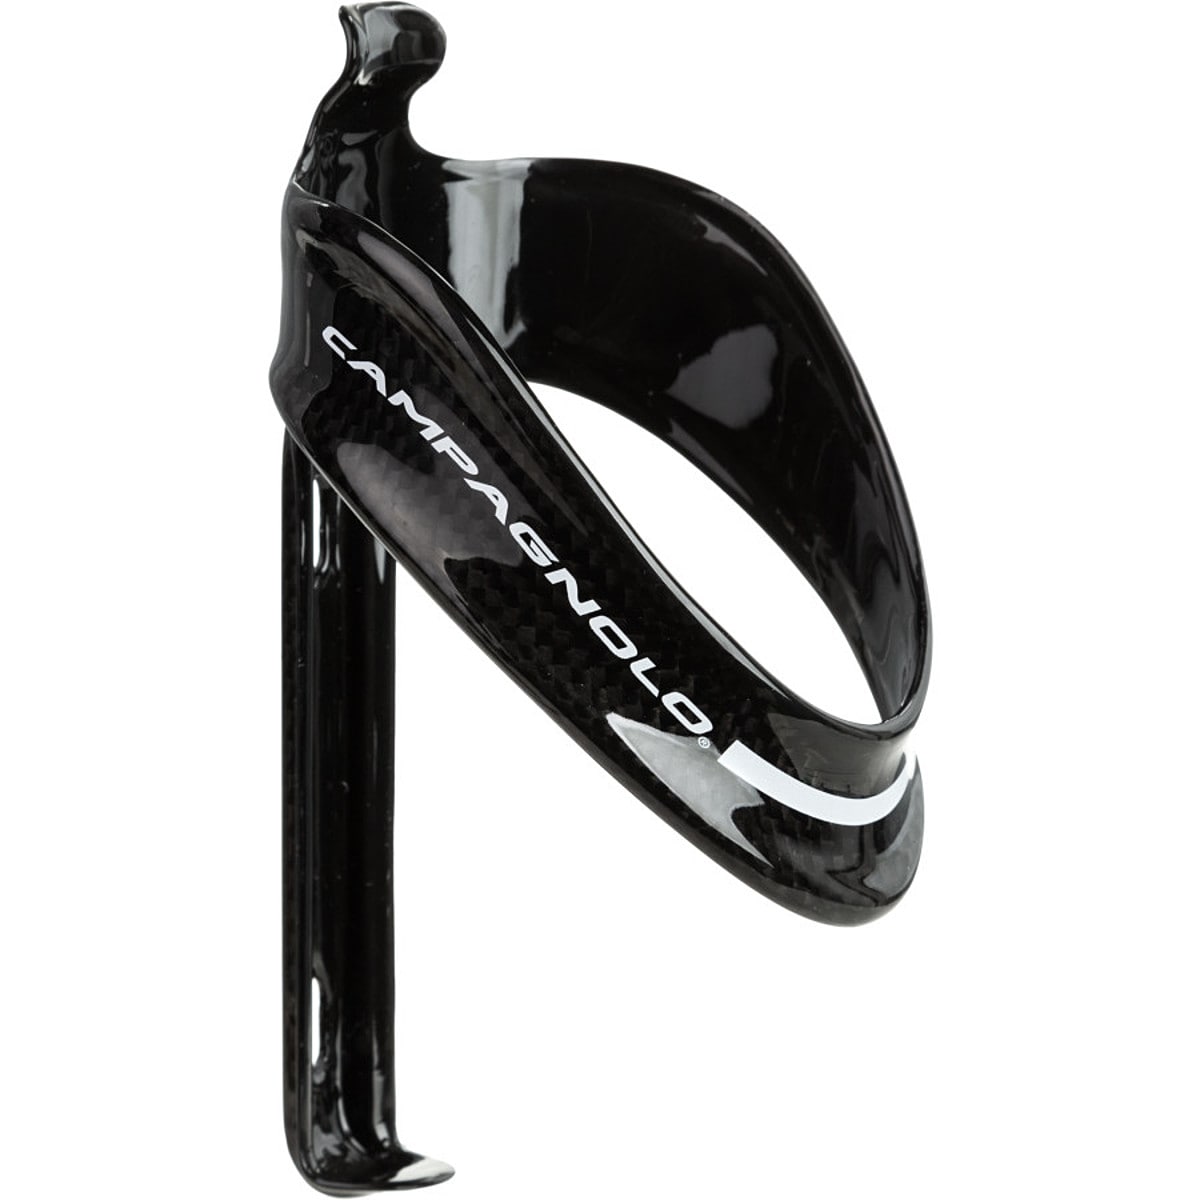 Campagnolo Campagnolo Super Record Carbon Water Bottle Cage with Bottle